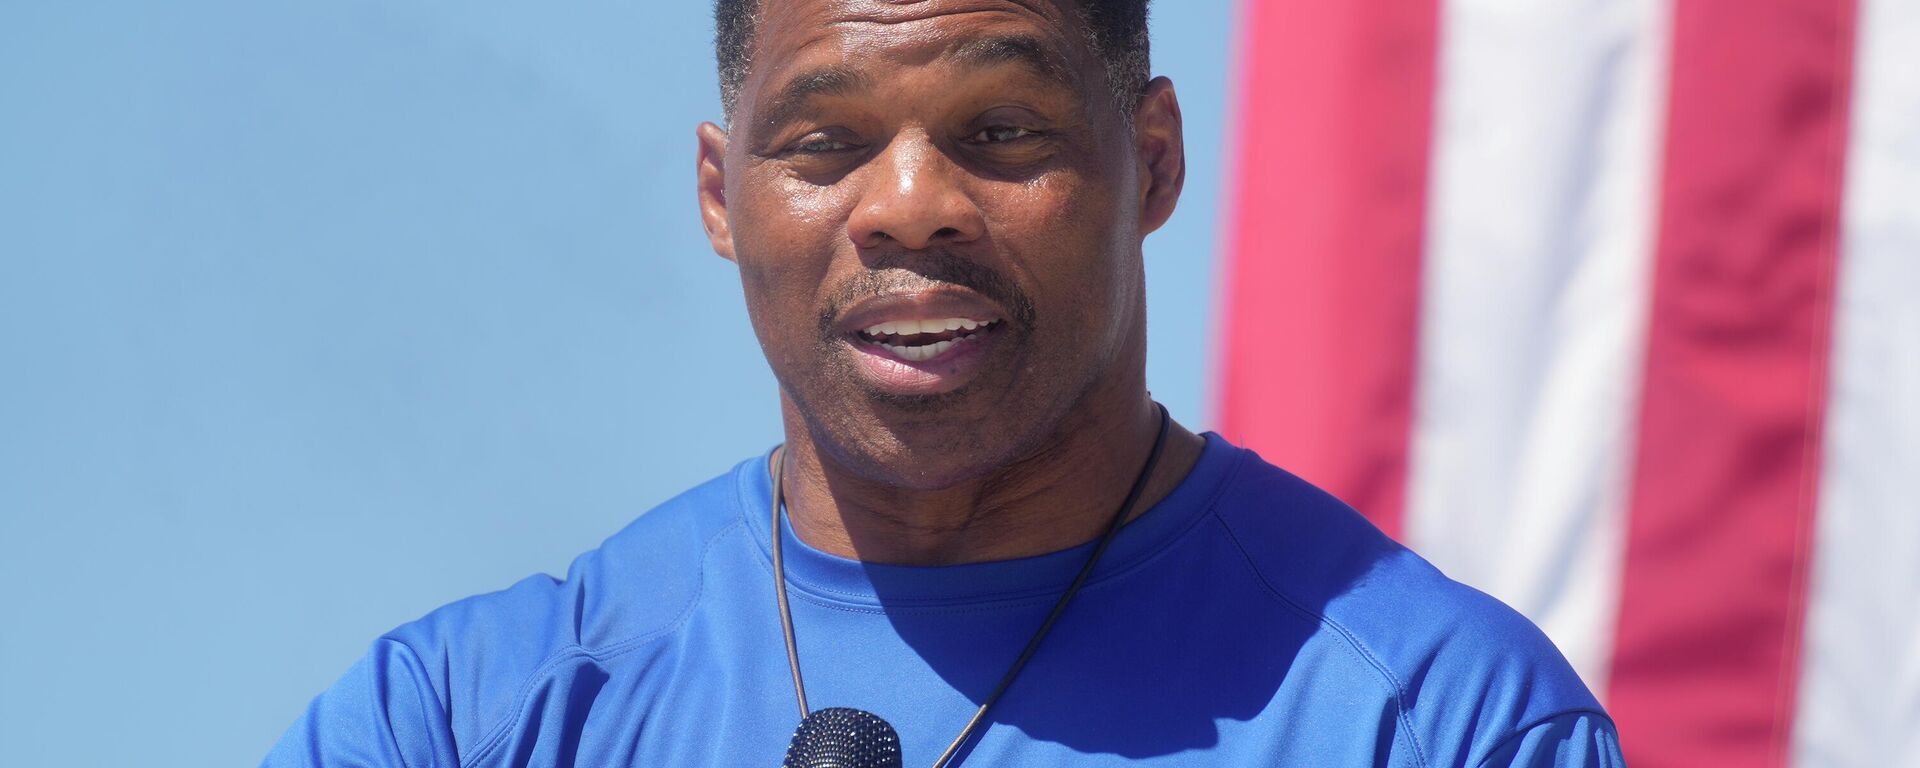 Georgia GOP Senate nominee Herschel Walker smiles during remarks during a campaign stop at Battle Lumber Co. on Thursday, Oct. 6, 2022, in Wadley, Ga. Walker's appearance was his first following reports that a woman who said Walker paid for her 2009 abortion is actually mother of one of his children - undercutting Walker's claims he didn't know who she was. - Sputnik International, 1920, 23.11.2022